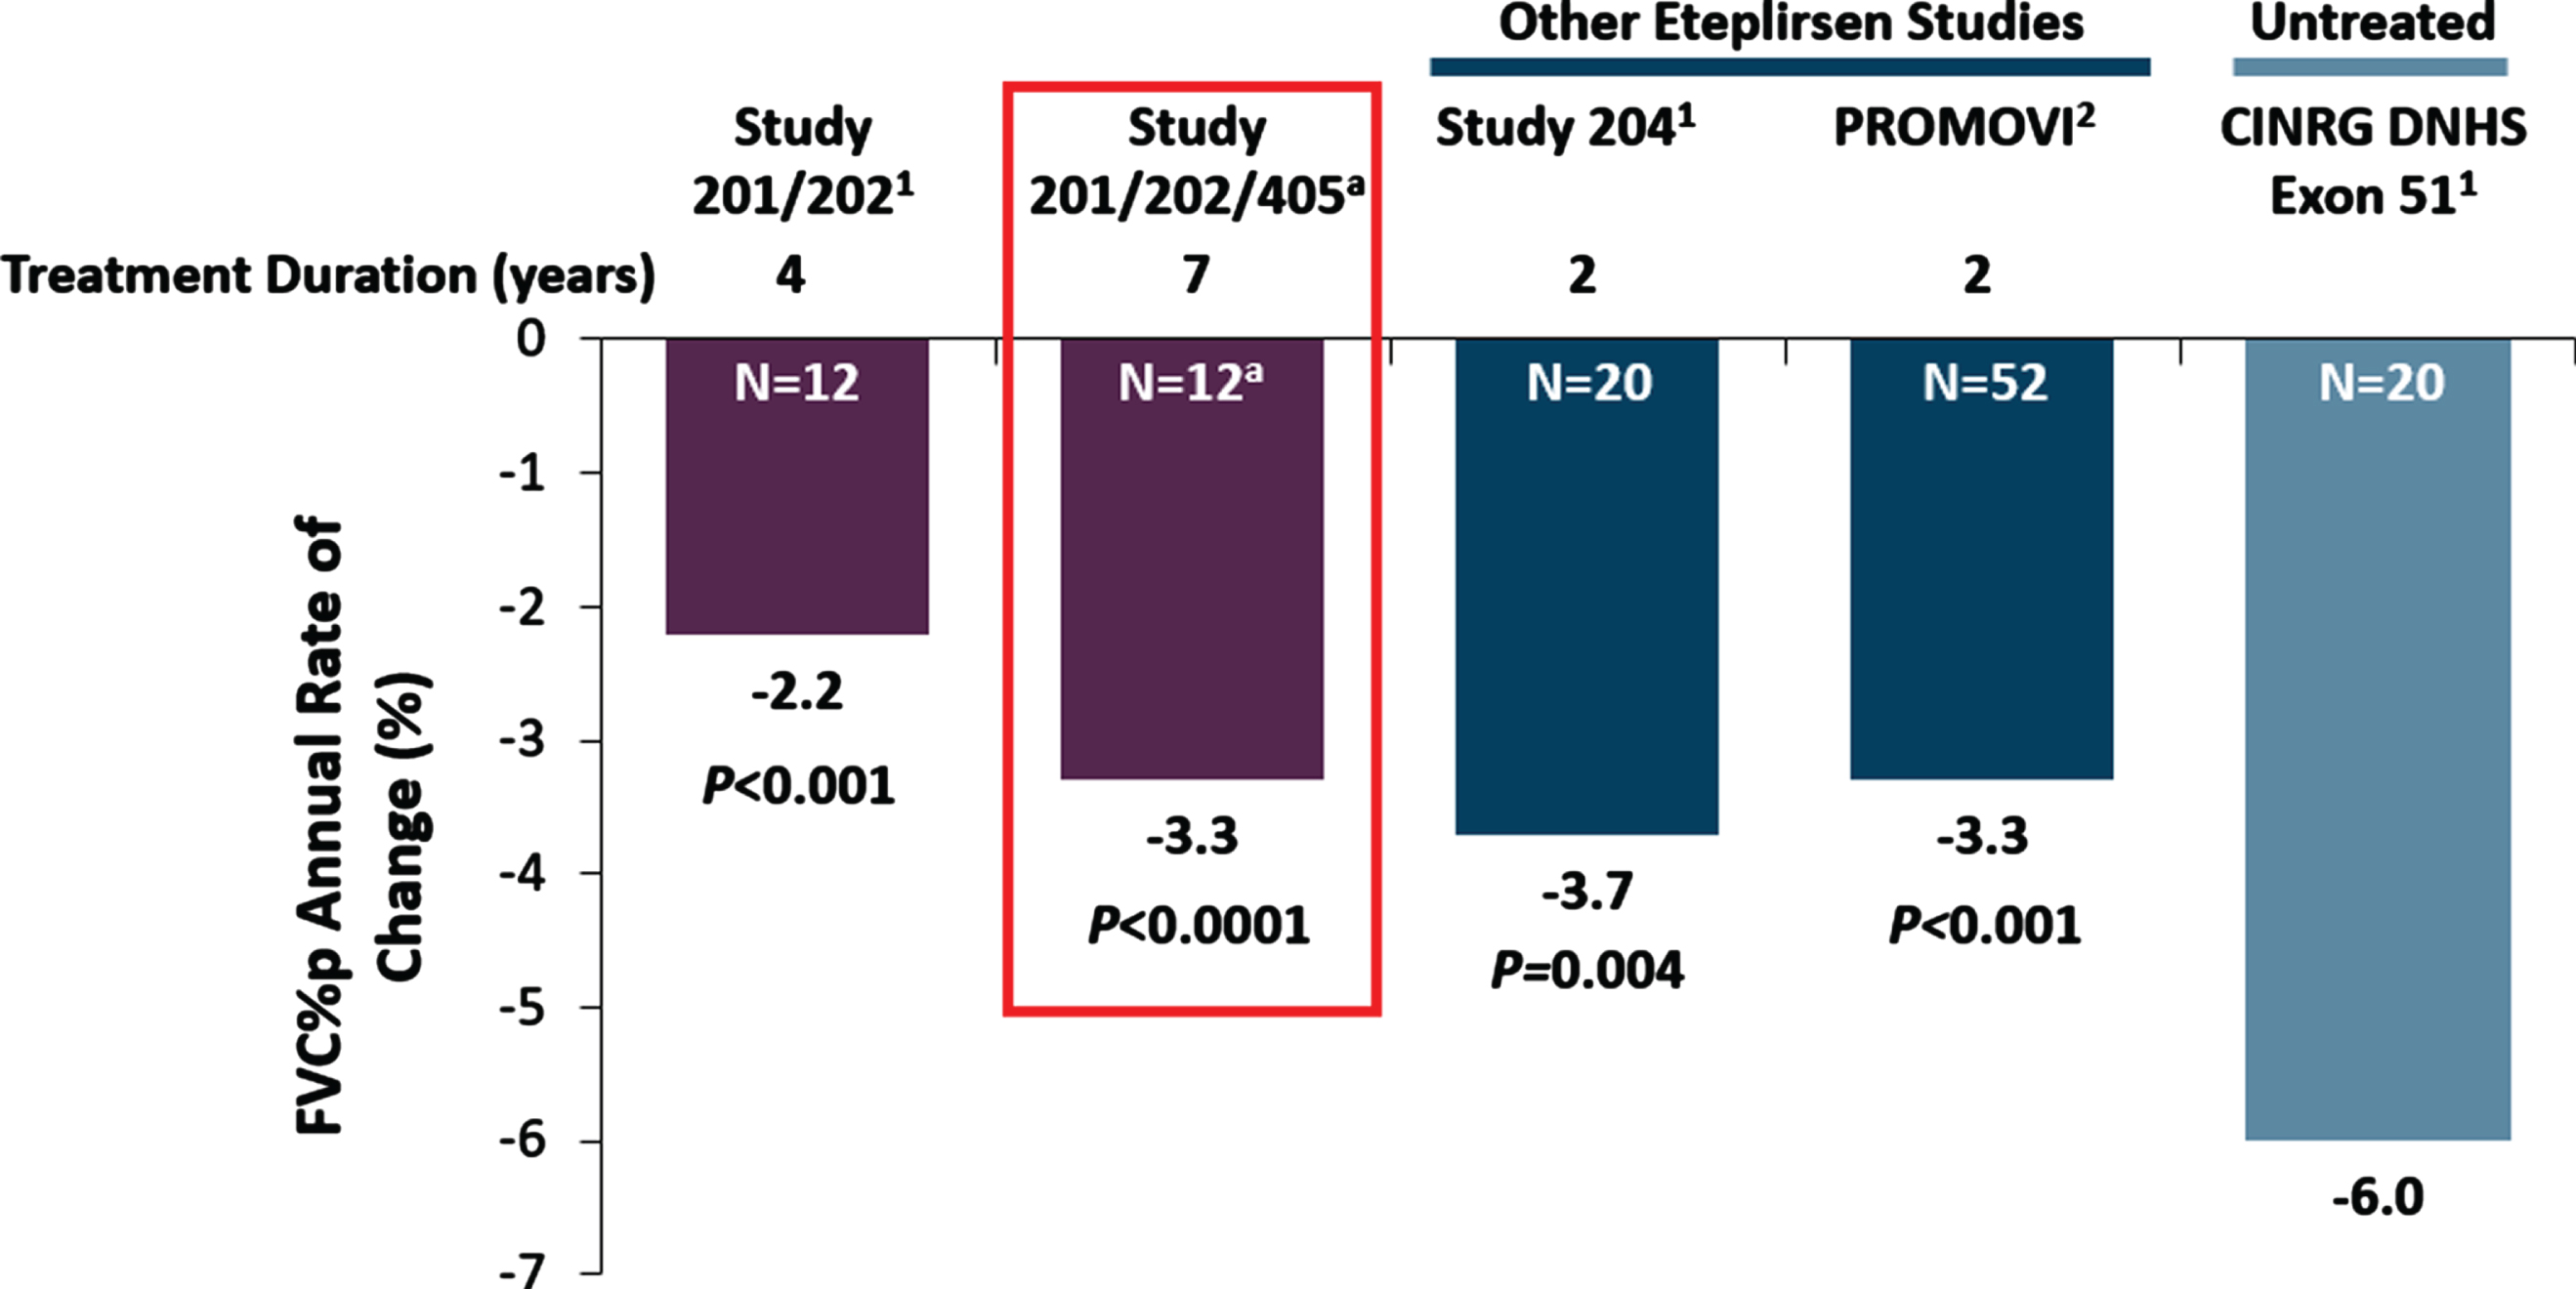 Pulmonary function in Studies 201/202 and 405 in comparison with matched natural history controls and other eteplirsen studies. Notes: aIncludes assessments up to Week 240 for 12 patients in Studies 201/202. Post Study 202, FVC%p data include 10 patients from Study 405. Nominal P-values vs CINRG DNHS exon 51 patients. Height was measured as standing height in Studies 201/202/405 and as ulnar length in Study 204, PROMOVI, and CINRG DHNS. 1Khan N, et al. J Neuromuscul Dis 2019;6 : 213-25. doi:10.3233/JND-180351 2McDonald CM, et al. J Neuromuscul Dis. 2021; Preprint: 1–13. doi:10.3233/JND-210643.